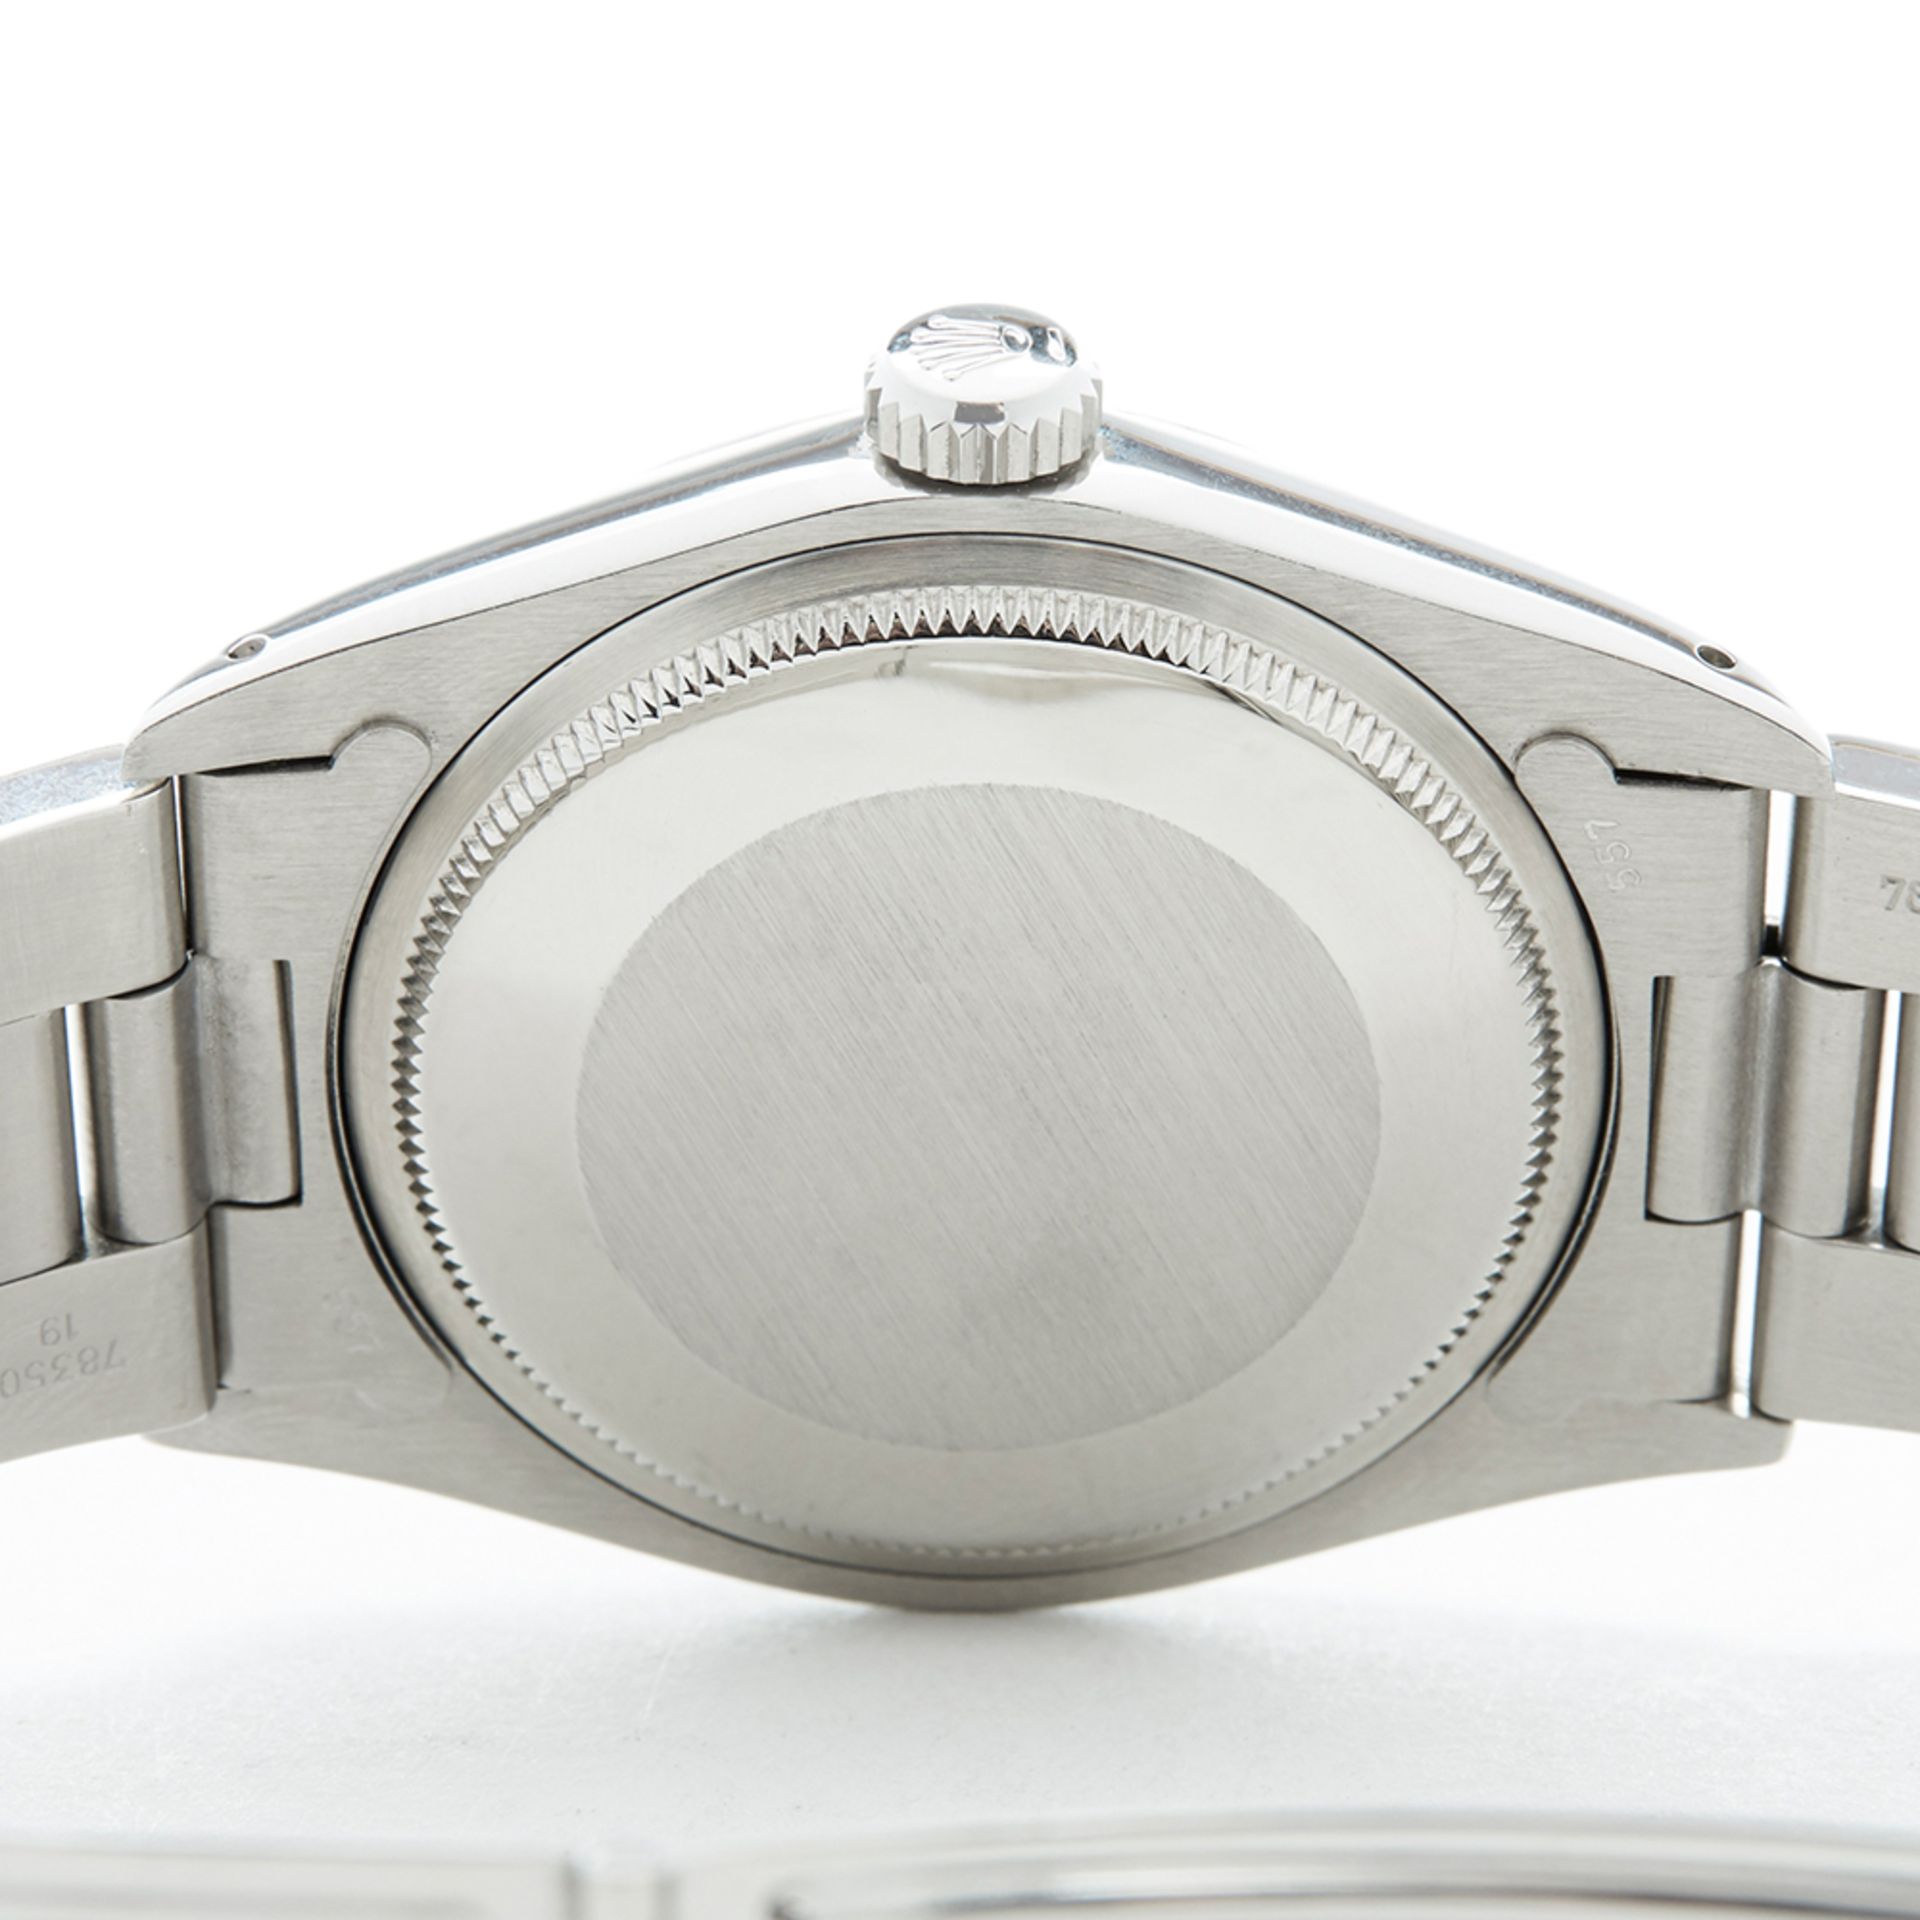 Rolex Date 36mm Stainless Steel 1500 - Image 8 of 9